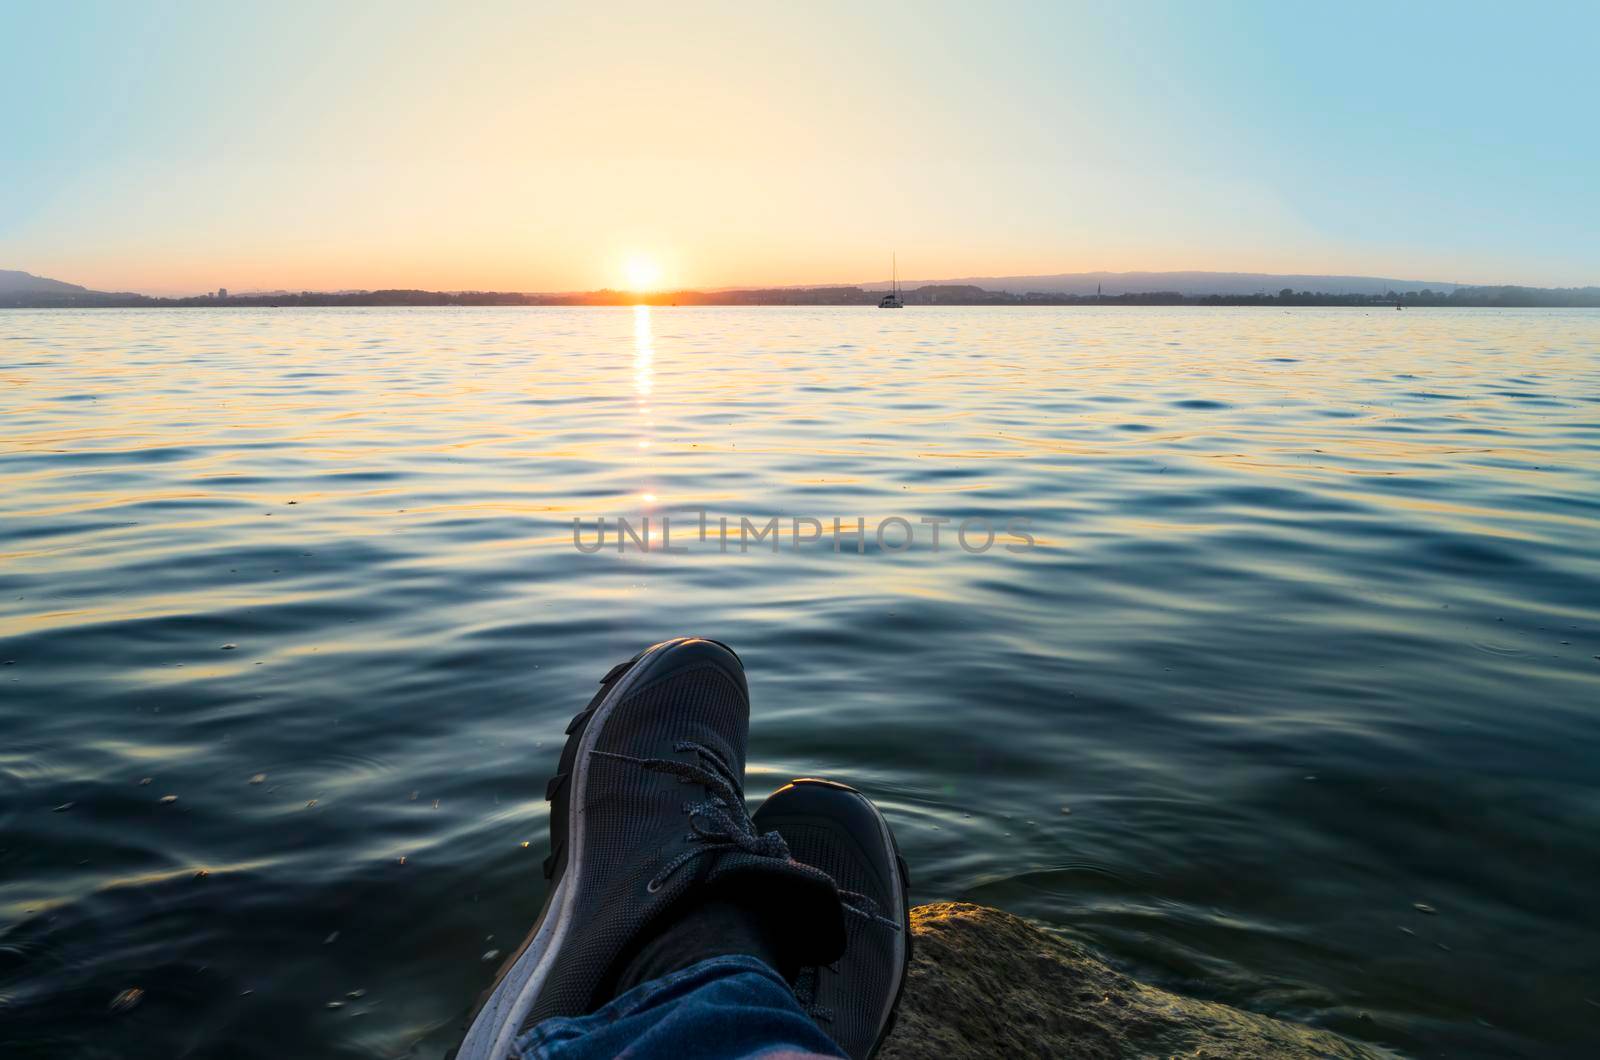 Sunset view of Lake Zugersee in the Swiss city of Zug with some slippers in the foreground of someone who is enjoying the sunset.